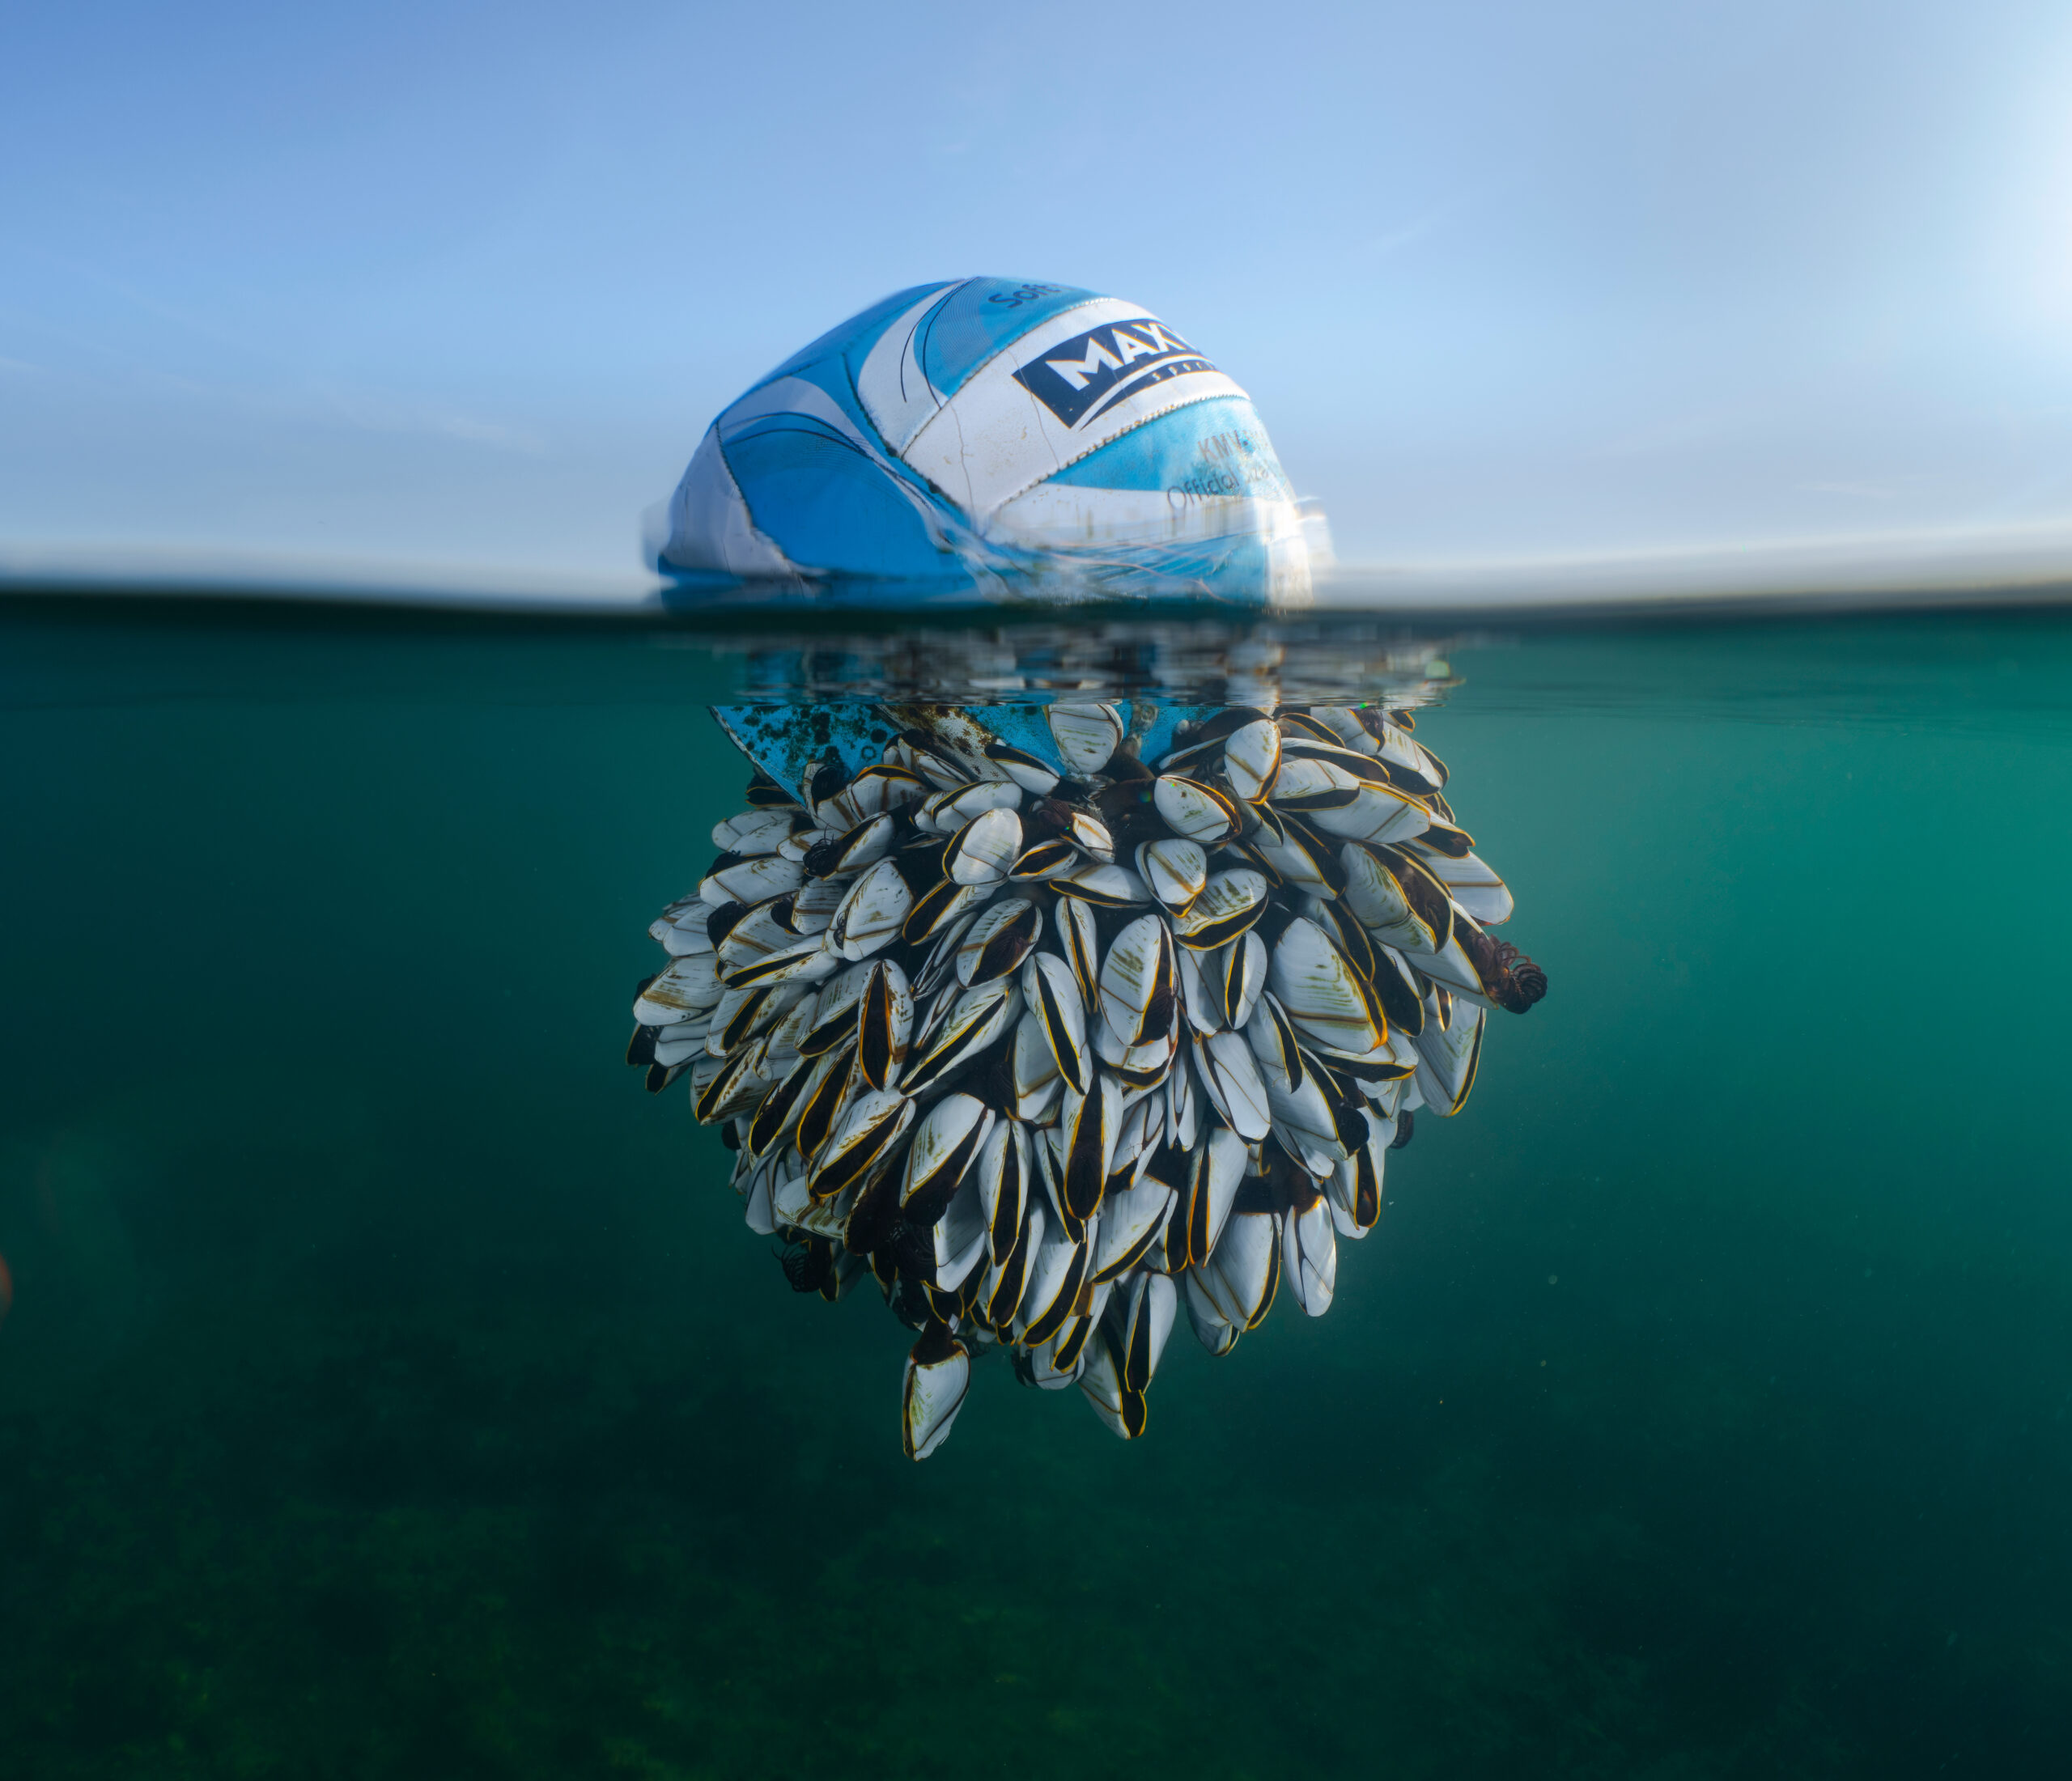 blue and white soccer ball floating on the water with a large mass of goose barnacles attached to the bottom half under water